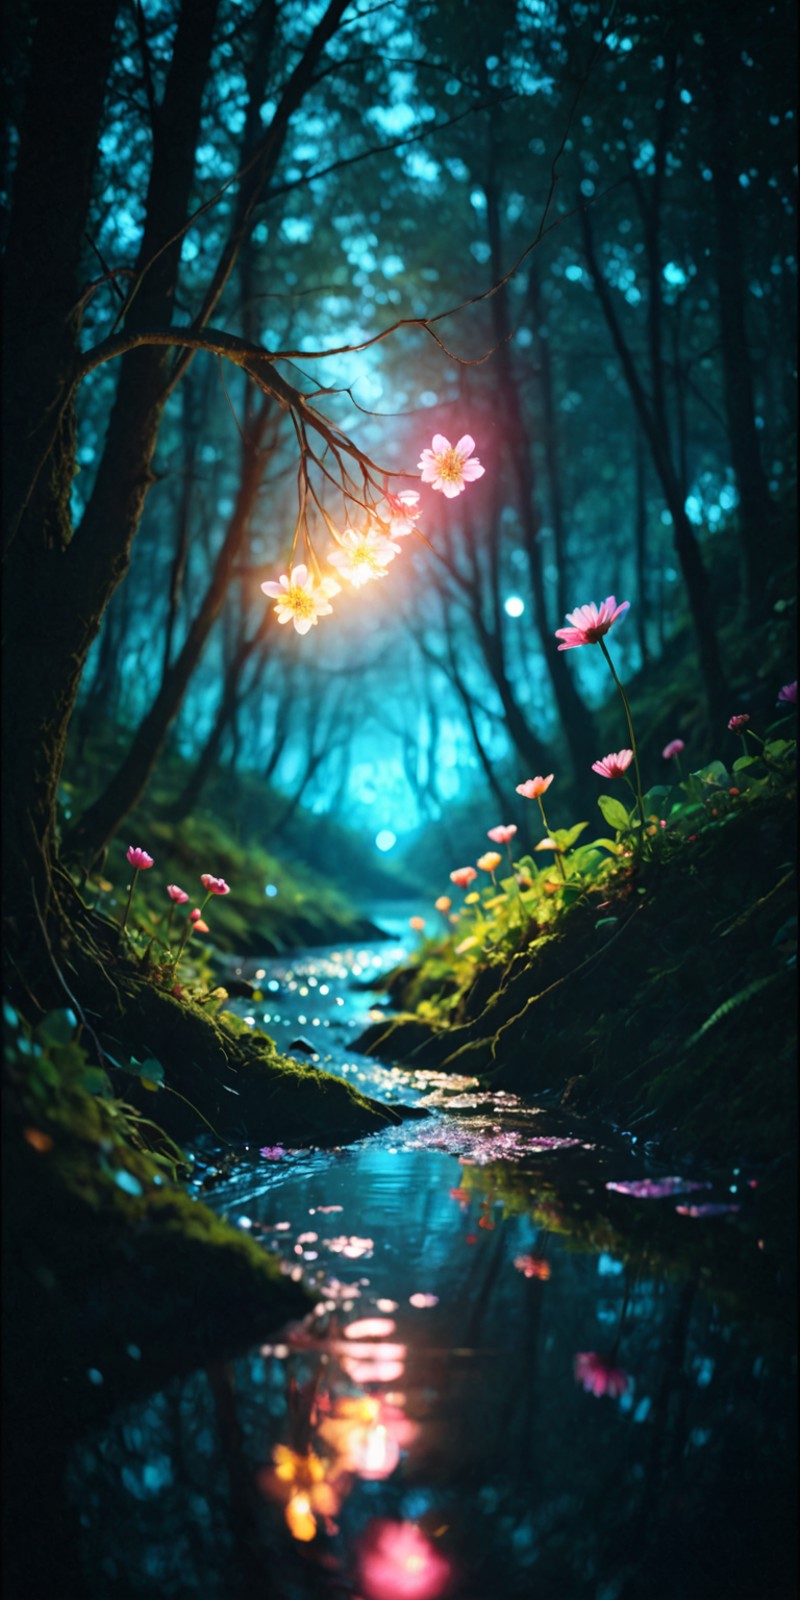 A narrow stream meandering under a tree with blossoms that appear to emit a soft glow in a dense forest. The water reflects the subtle light from the flowers and the dim glow from what sunlight filters through the canopy.